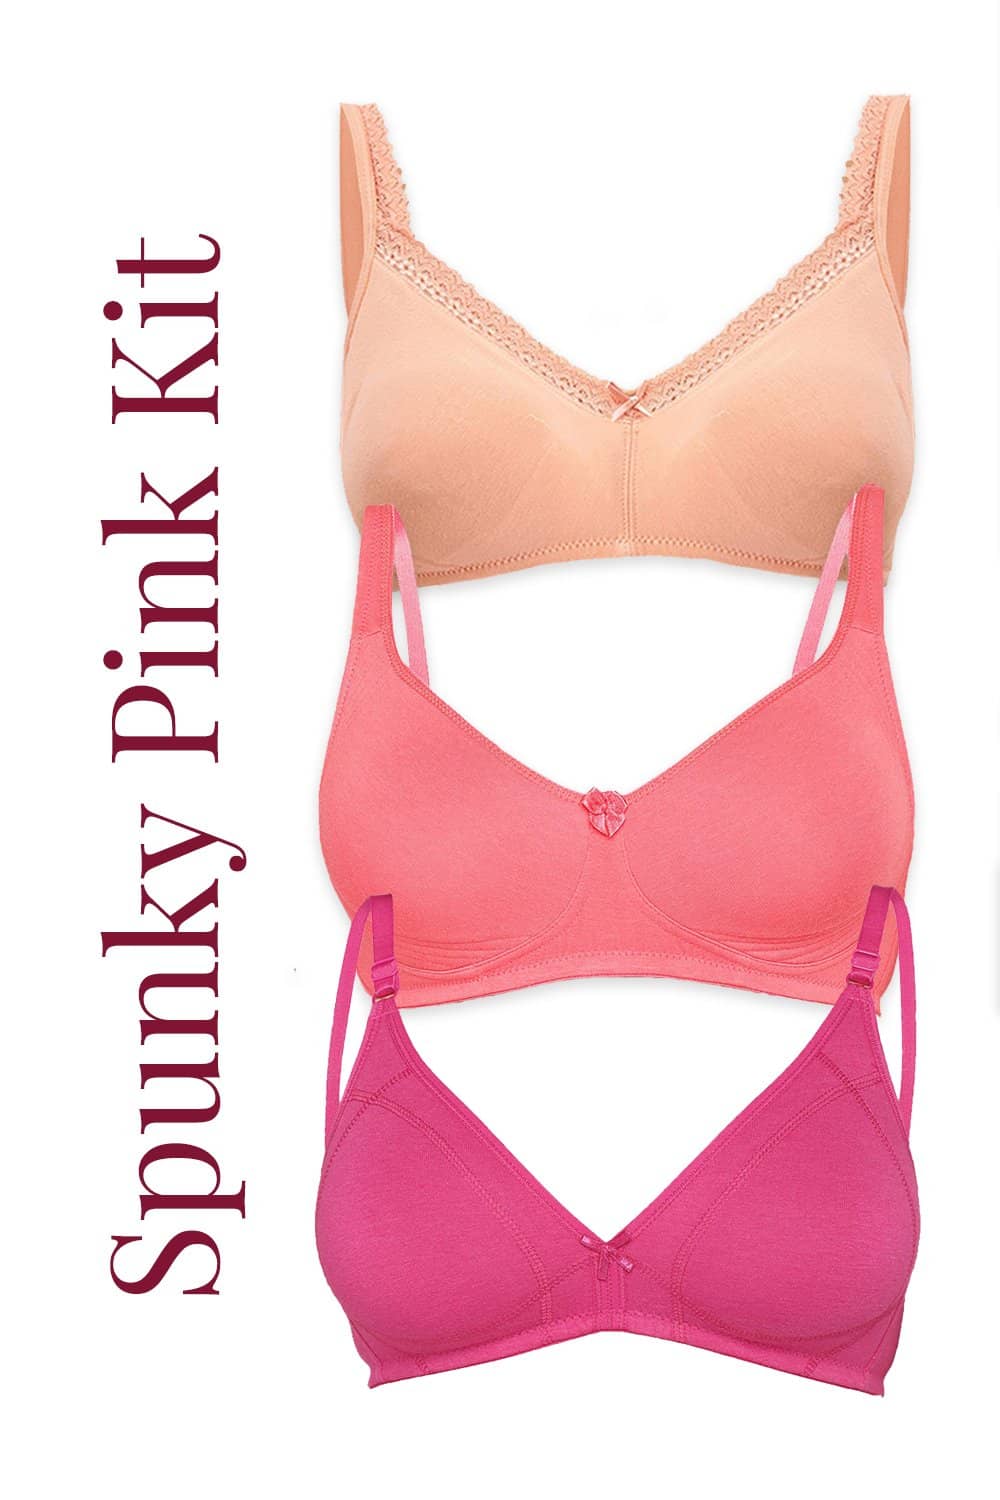 Organic Cotton Antimicrobial Spunky Pink Bra Kit (Pack of 3)-ISBK07